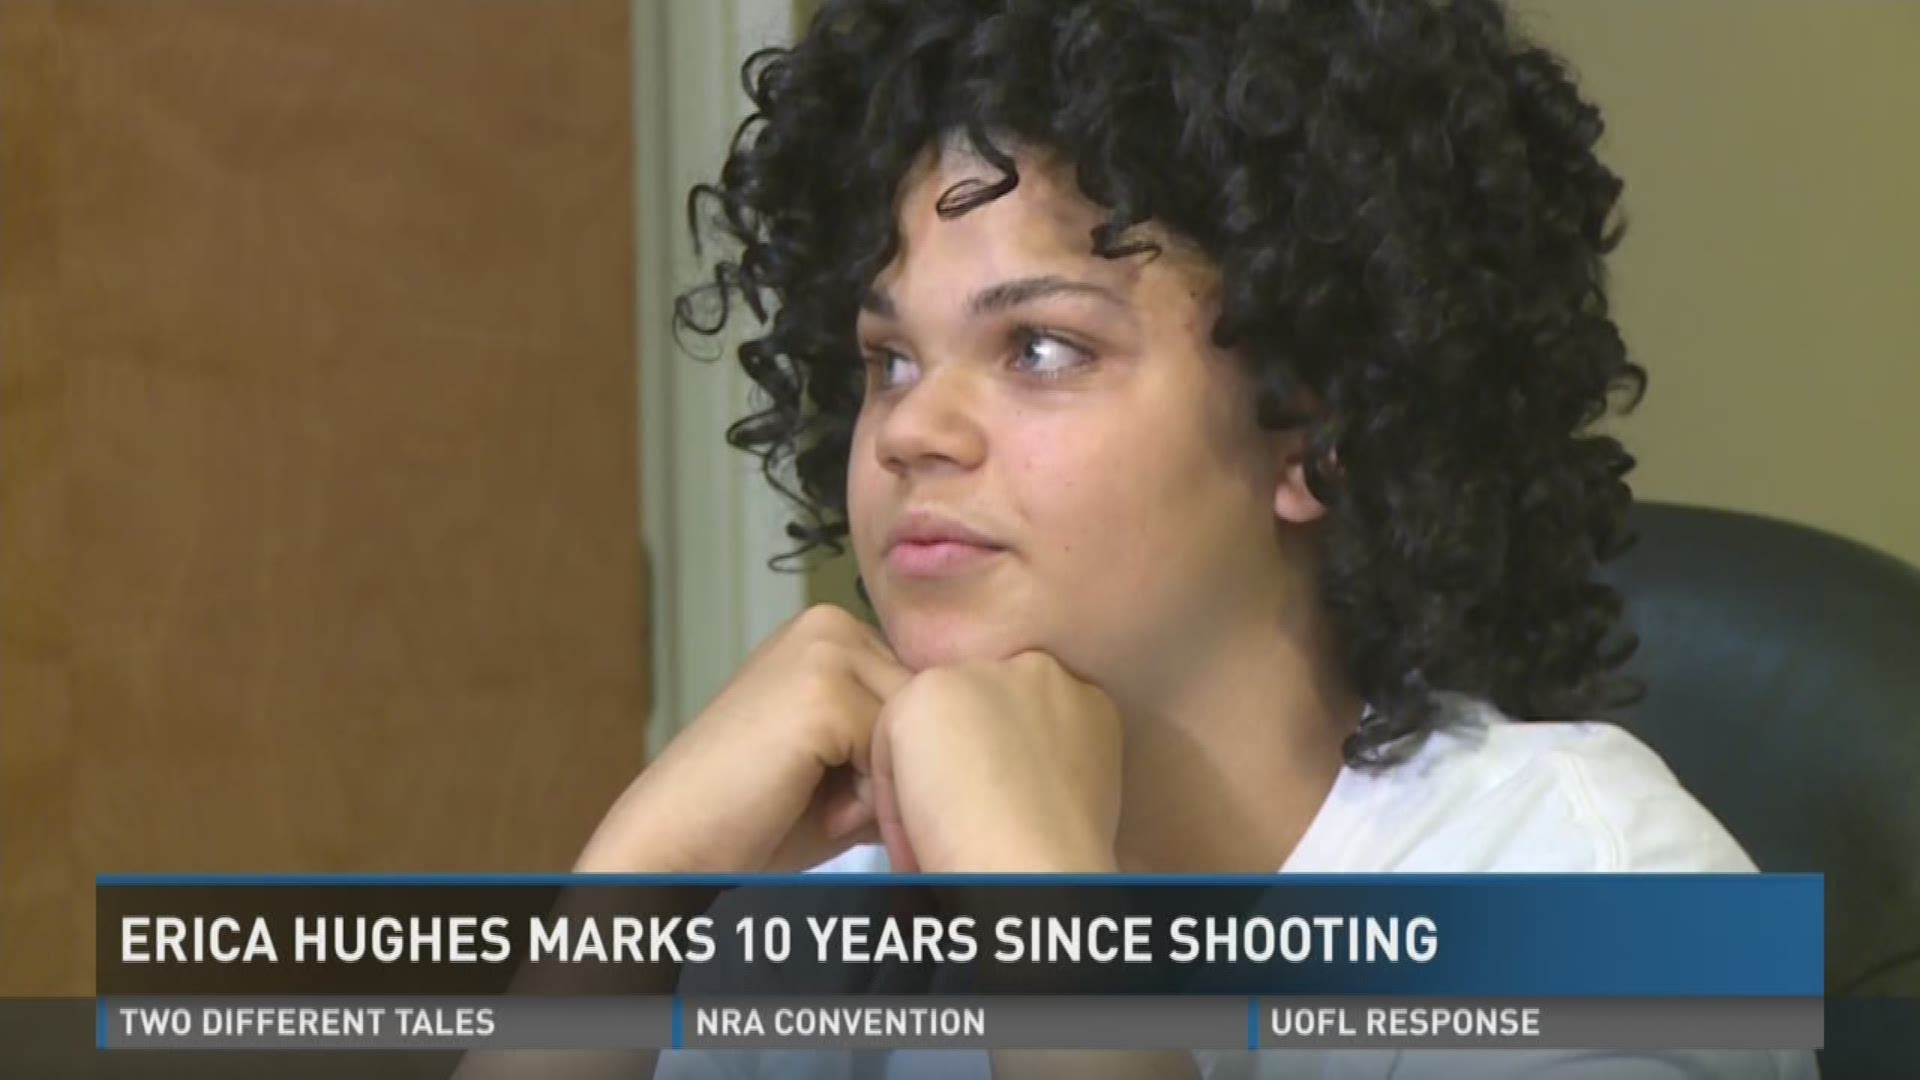 Erica Hughes marks 10 years since shooting